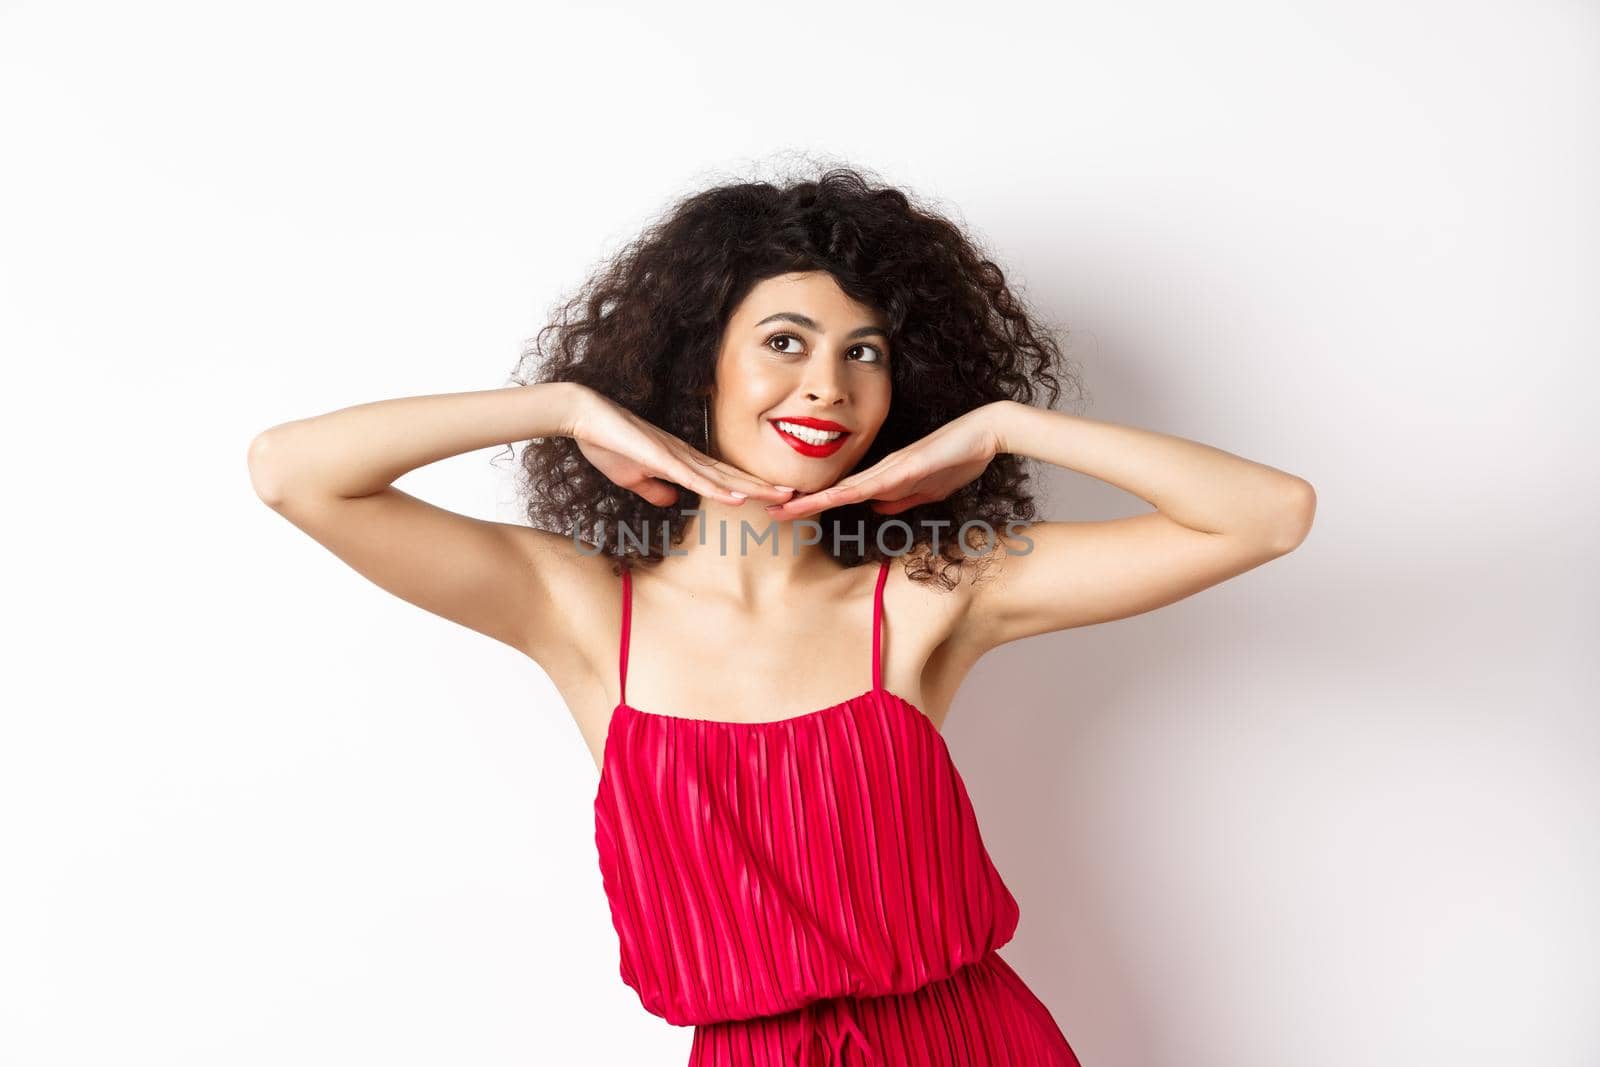 Beautiful lady with curly hair, wearing red dress, showing hear face with makeup and smiling, feeling carefree on white background.